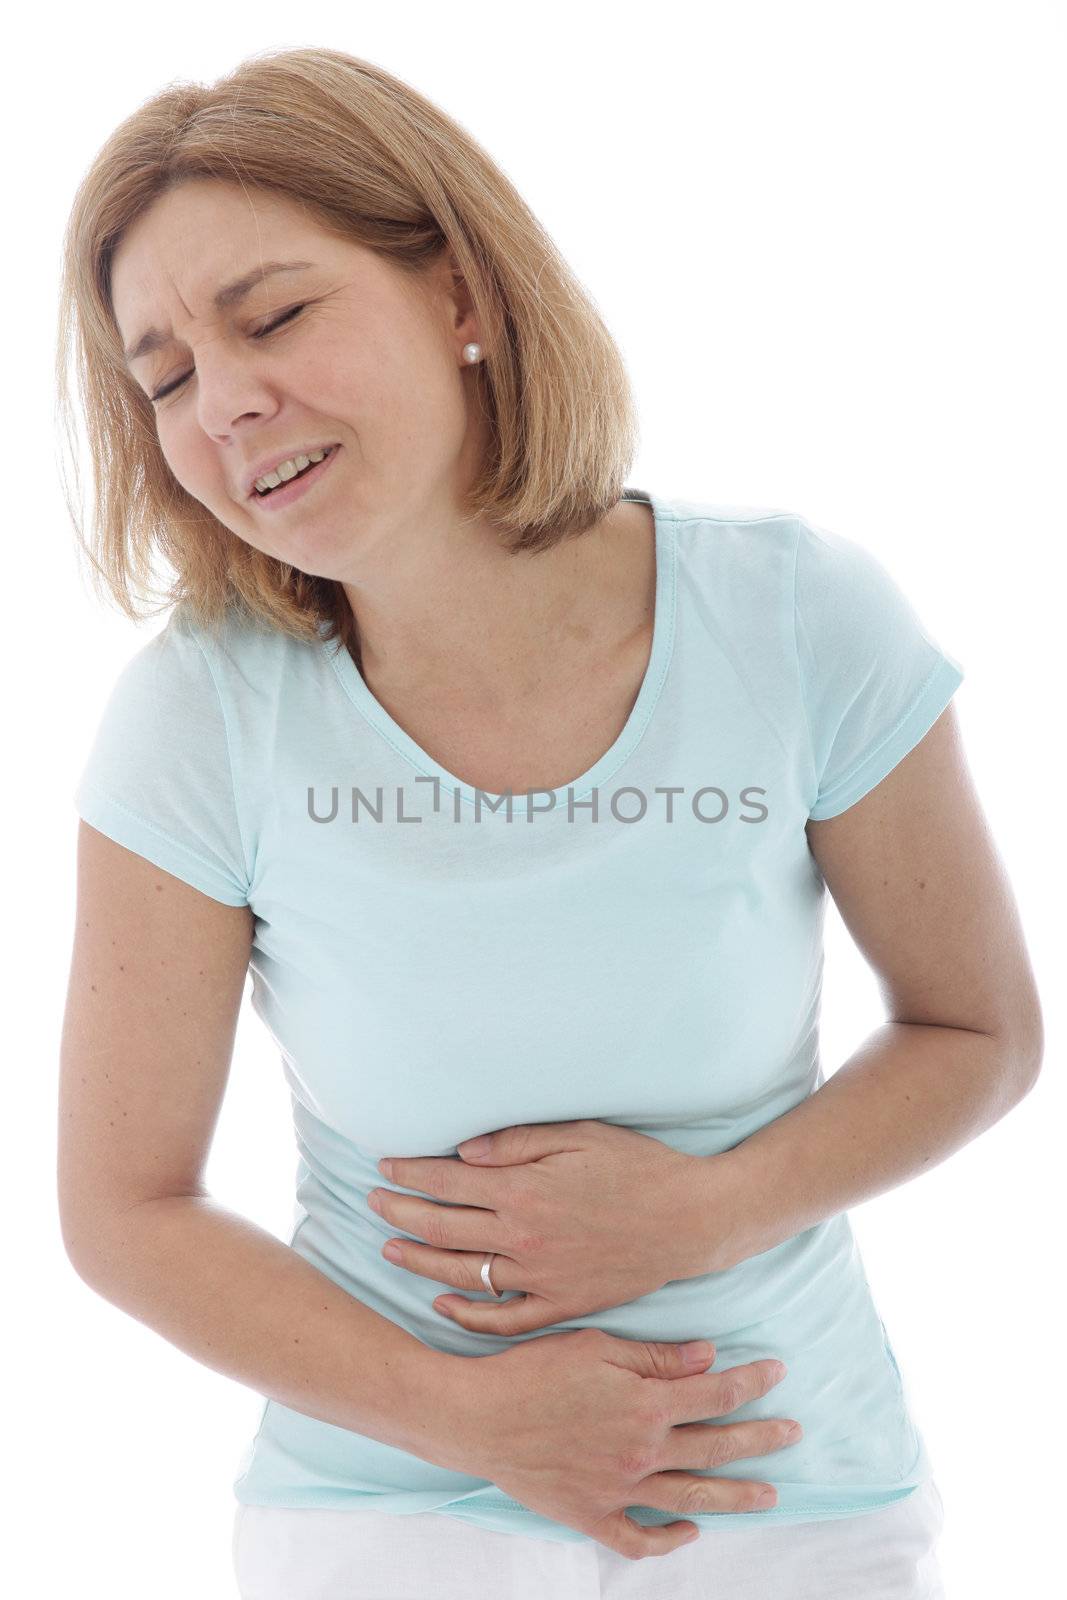 Woman with stomach pain clutching her tummy with both hands while grimacing in anguish, isolated on white